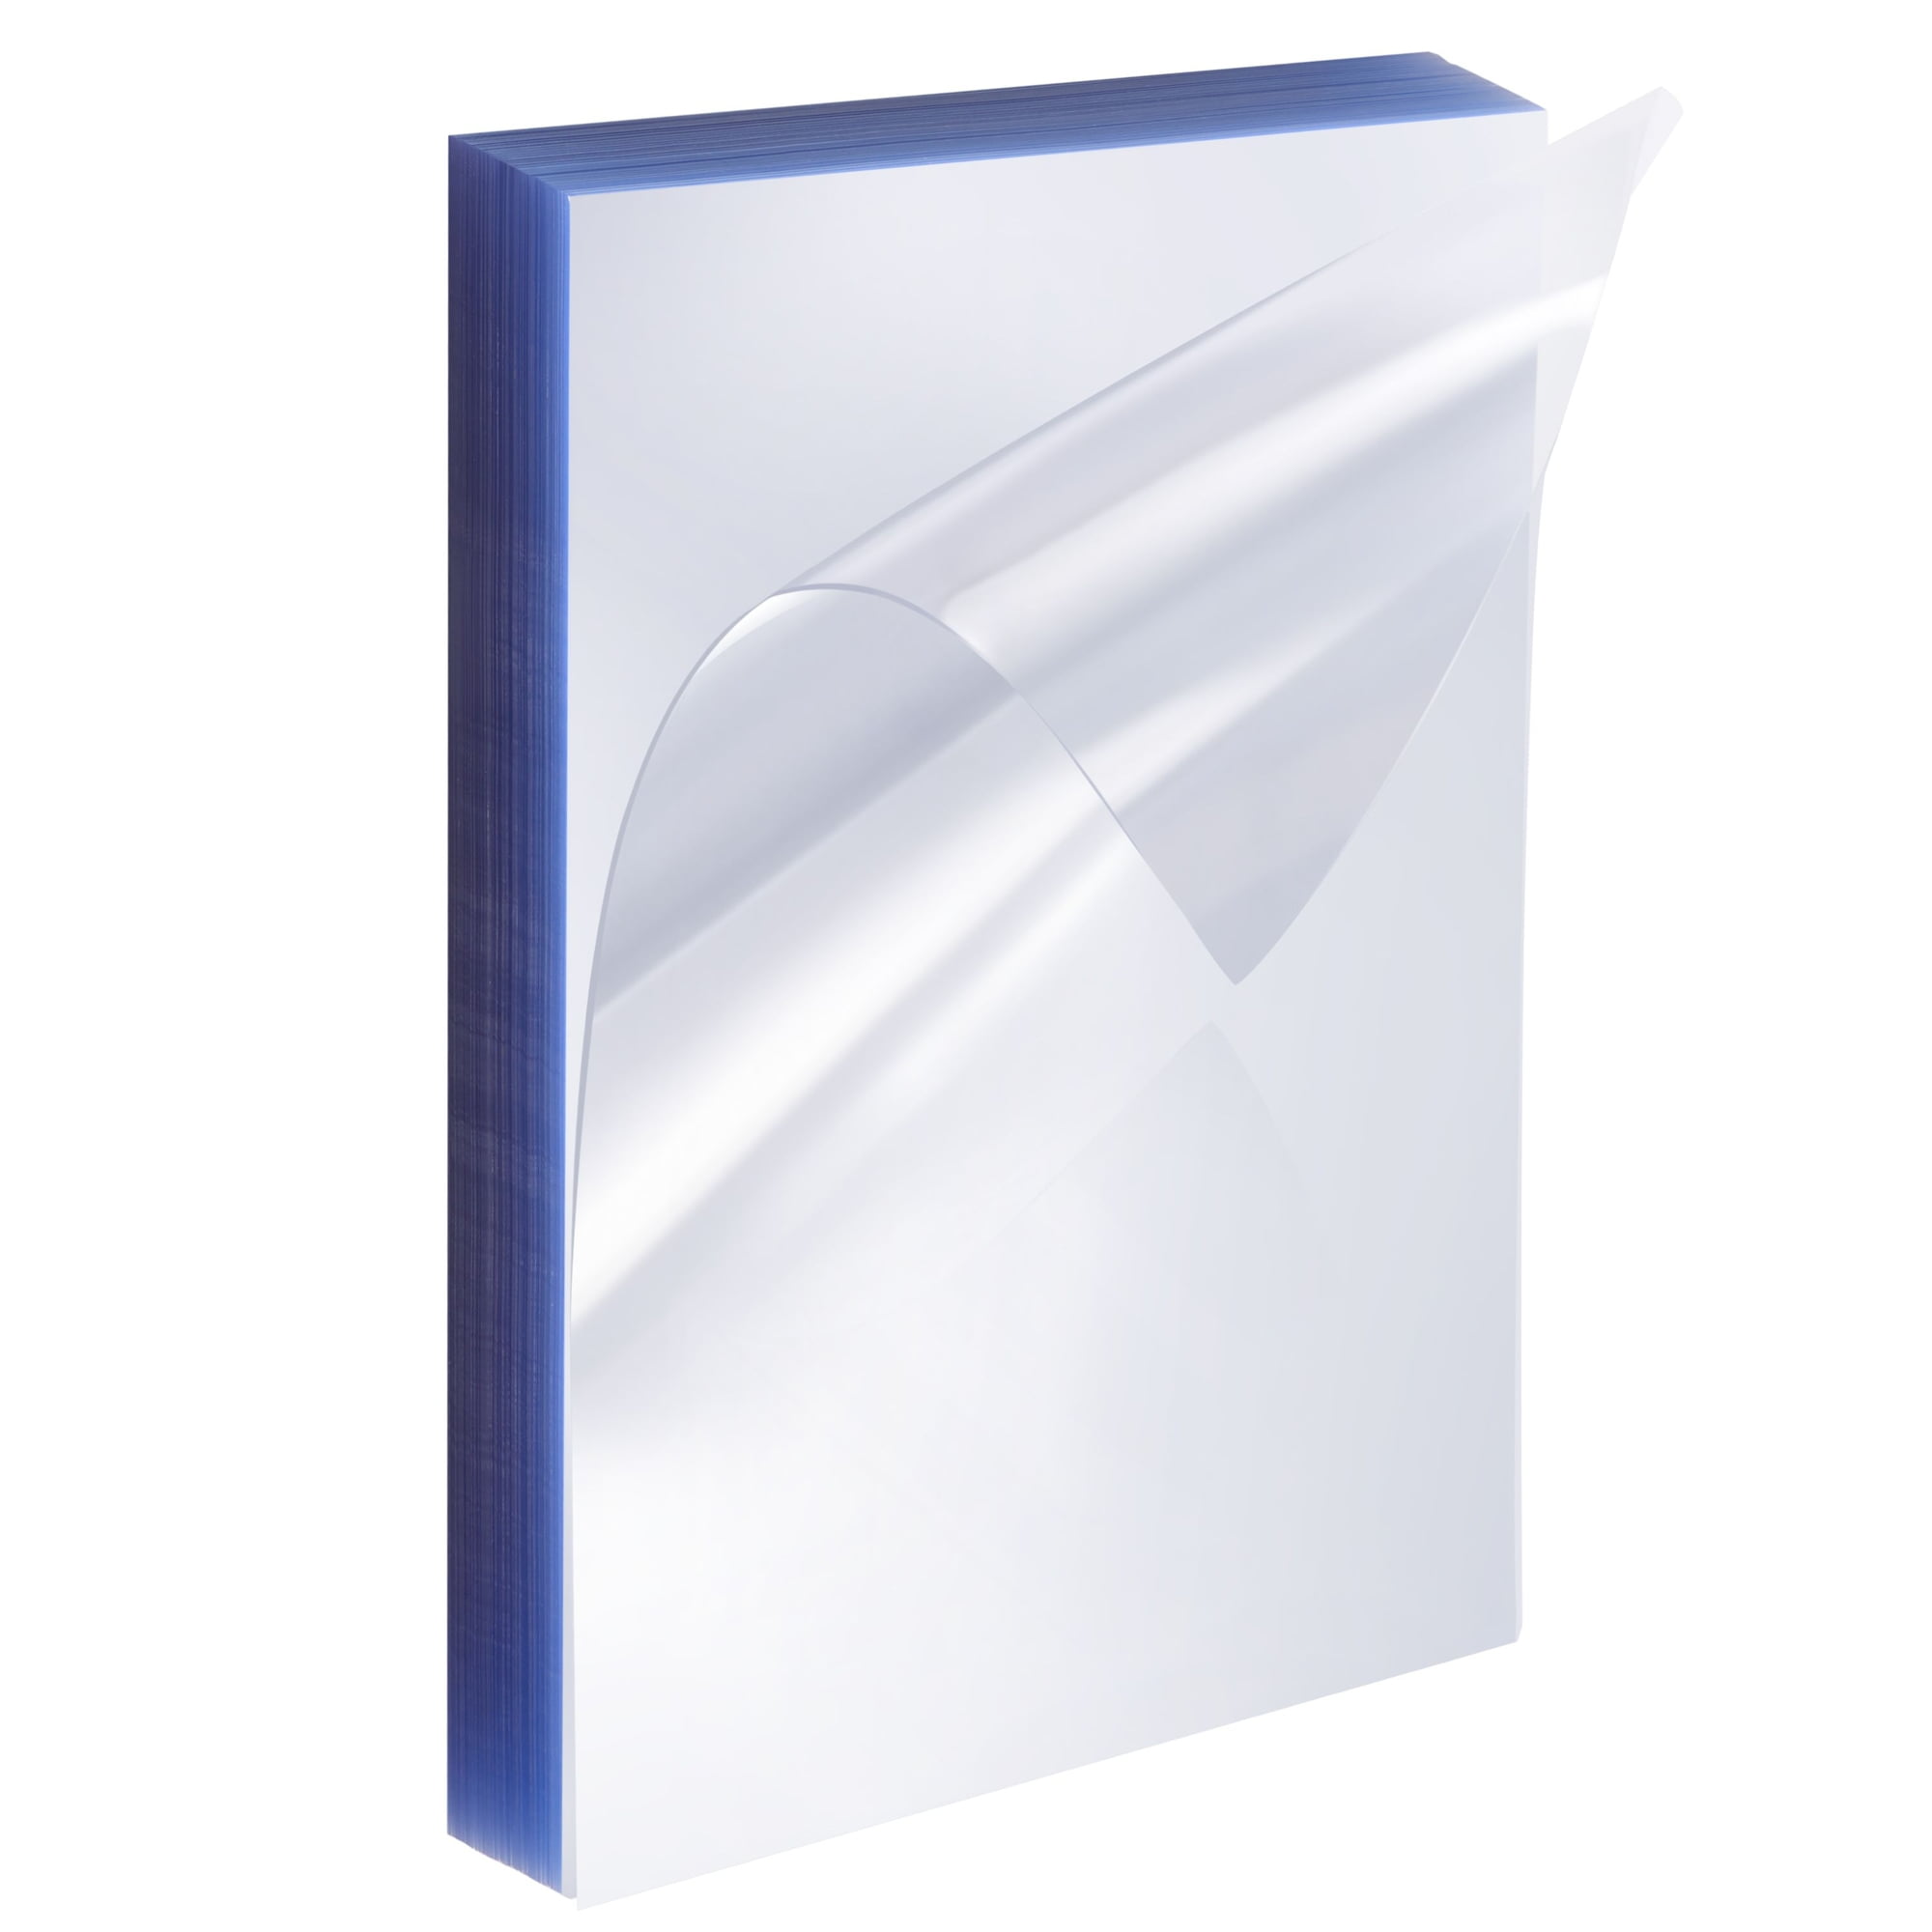 Clear Book Binding Covers - Presentation Report Flexible Covers -  Unbelievable Strength - Delran Business Products